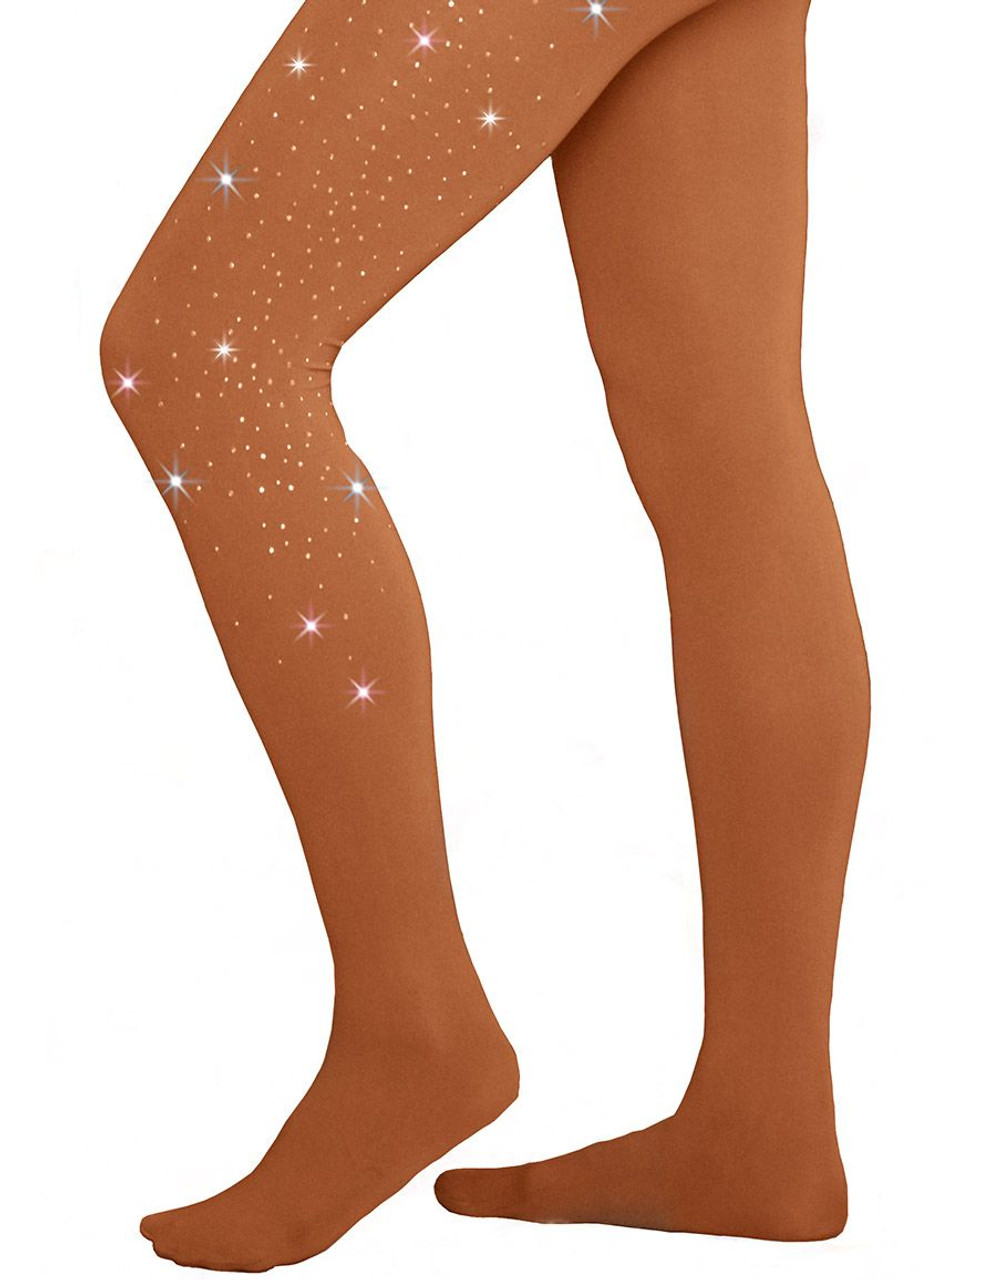 ChloeNoel Light Tan Footed Tights w/ Crystals on One Thigh - Pink Princess